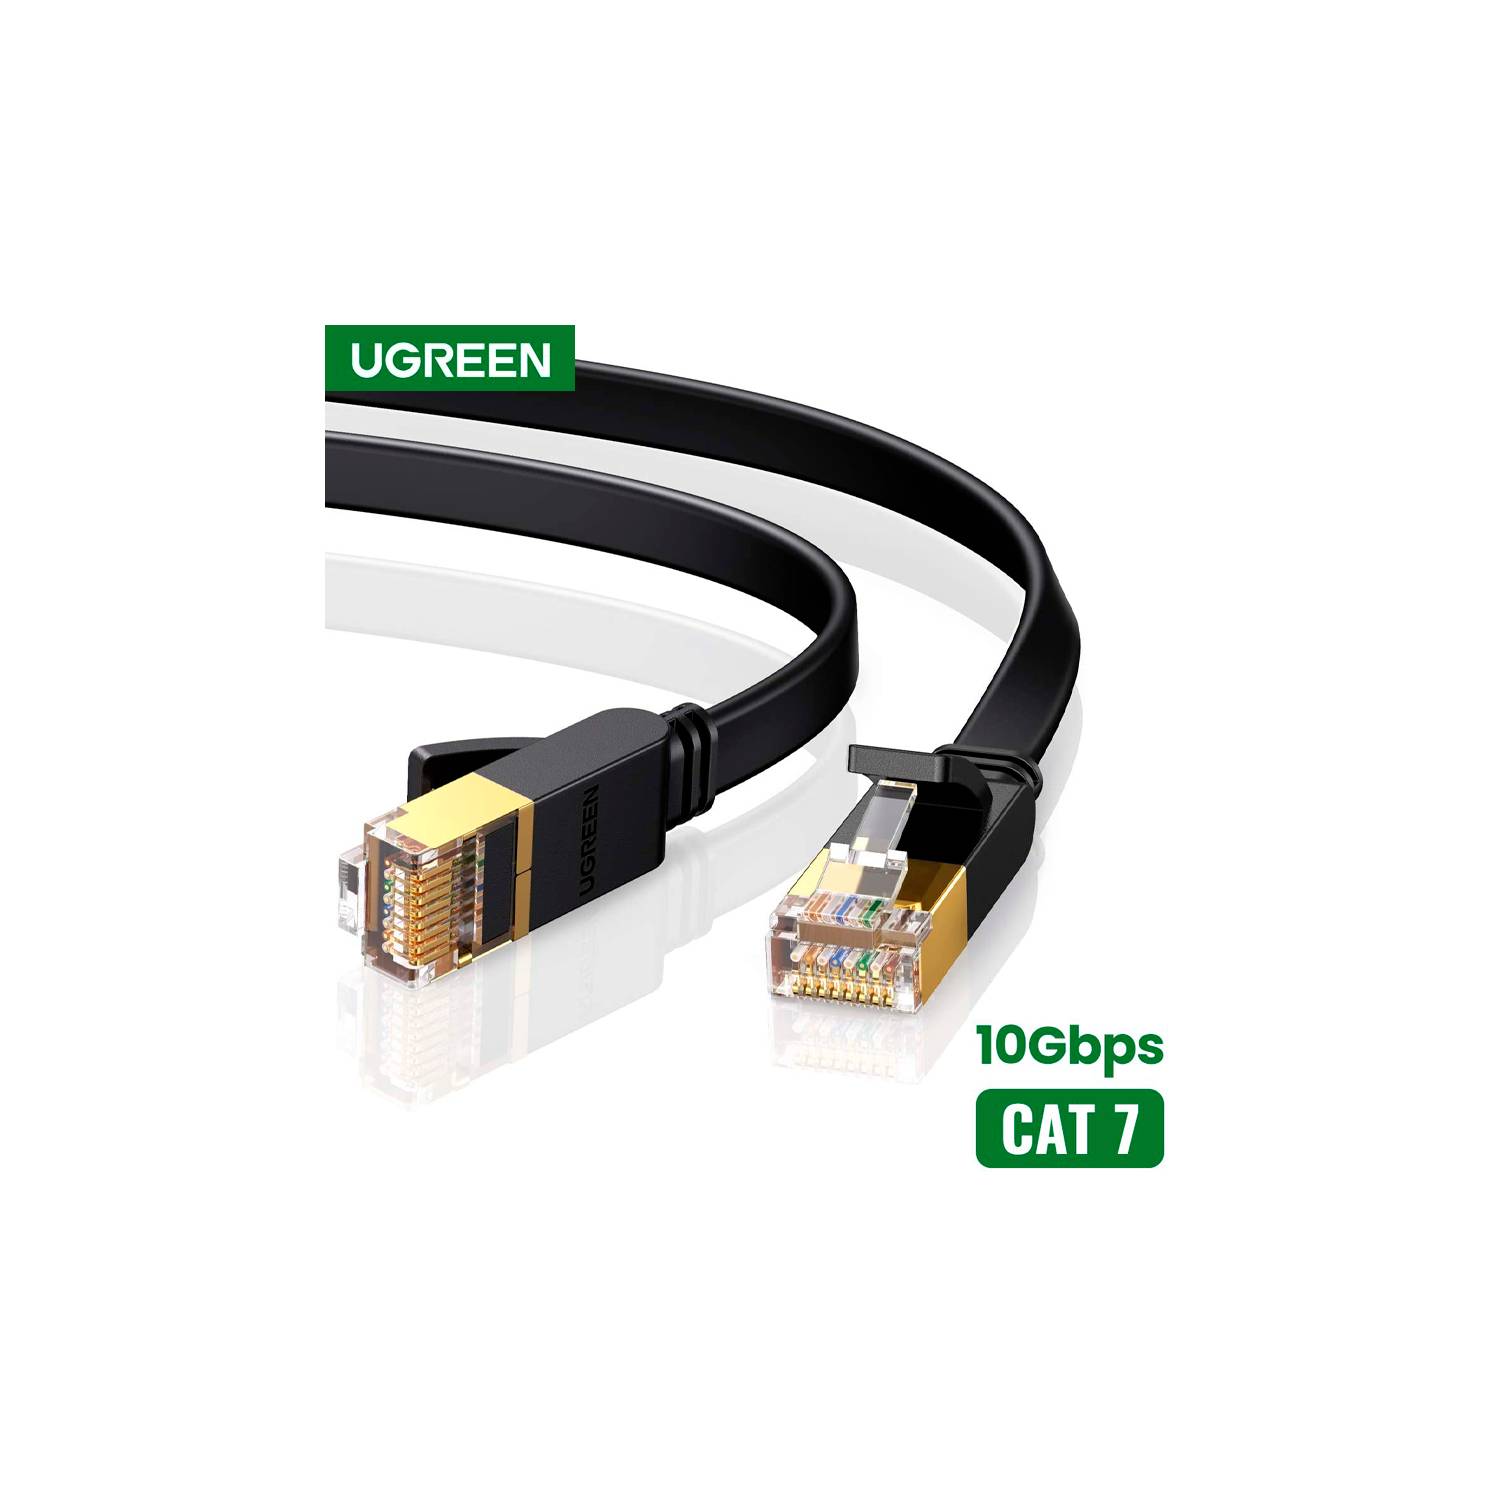 Cable Ethernet Ugreen Lan RJ45 Cat 7 Cable Plano 20metros UGREEN